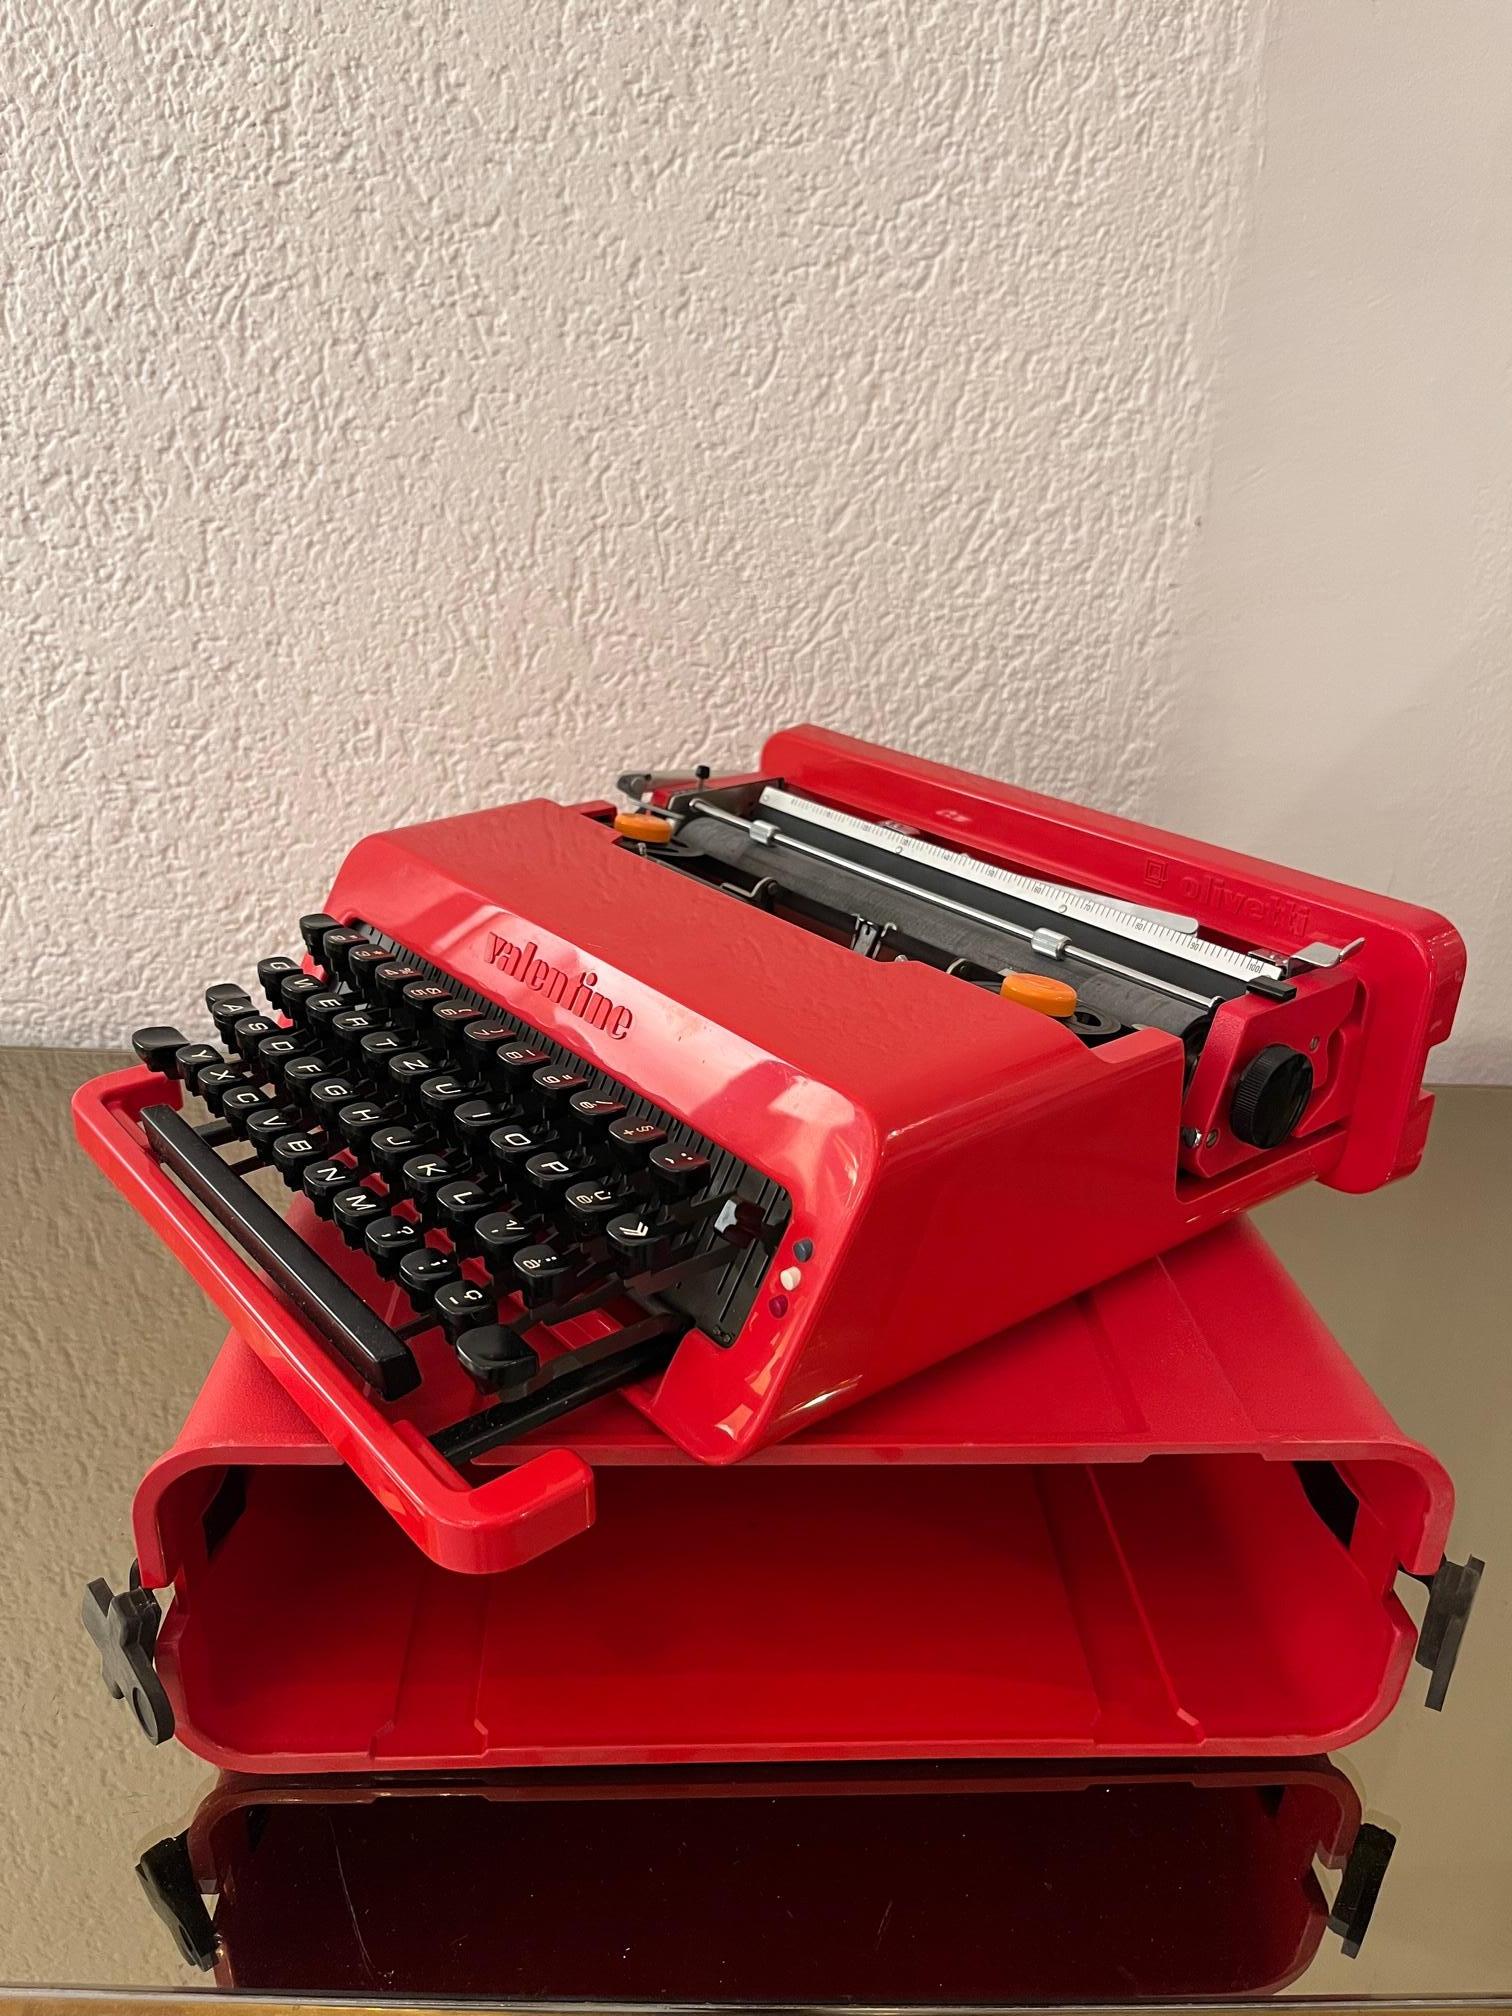 Vintage iconic Valentine typewriter designed by Ettore Sottsass and produced by Olivetti, Italy ca. 1960s
Very good working condition.
